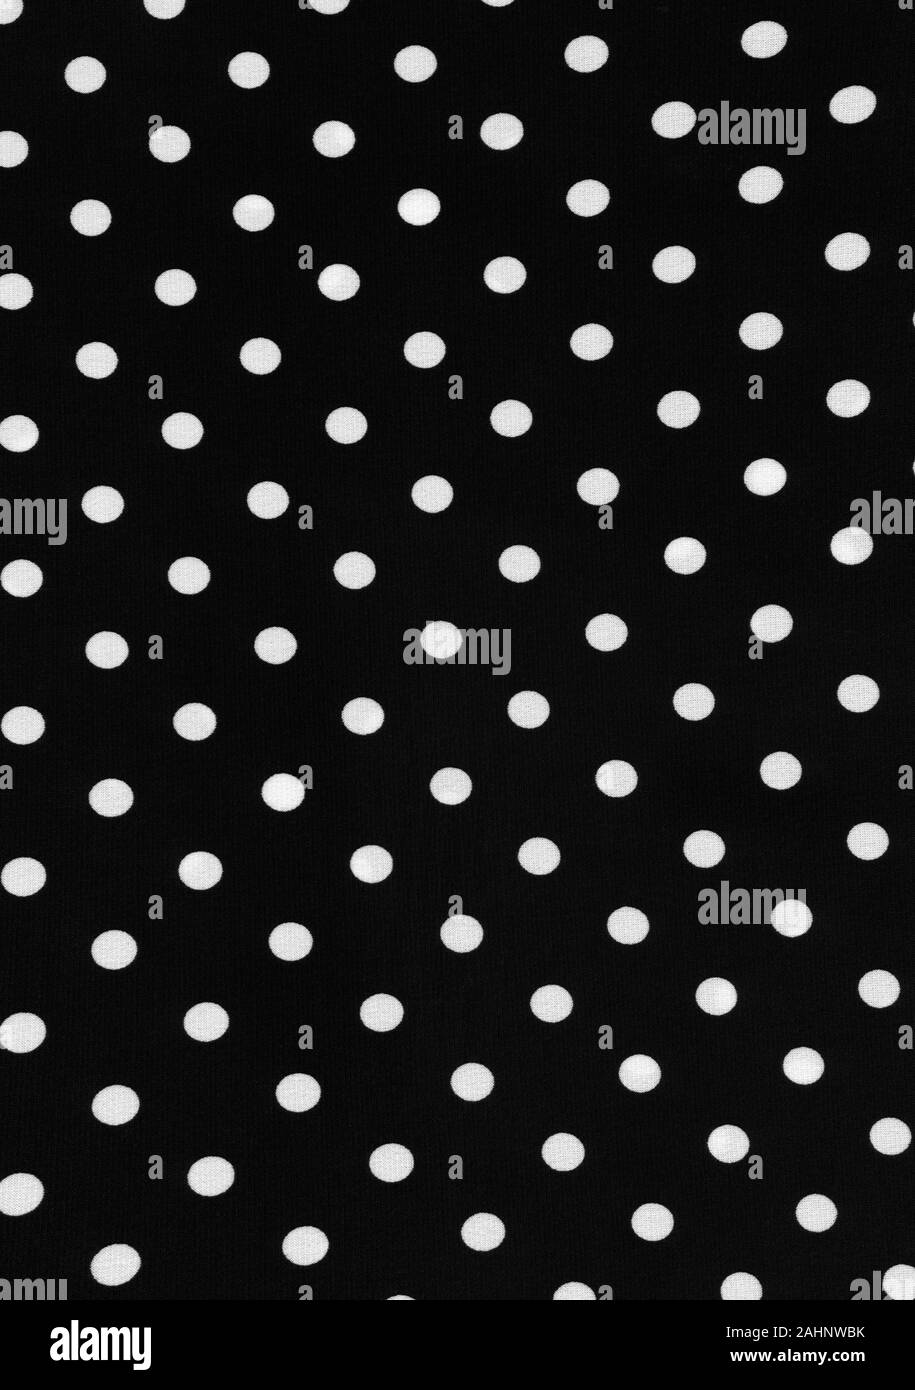 Black and white colored polka dot piece of polyester and spandex material background. This is a high resolution scan showing all the detail. Stock Photo